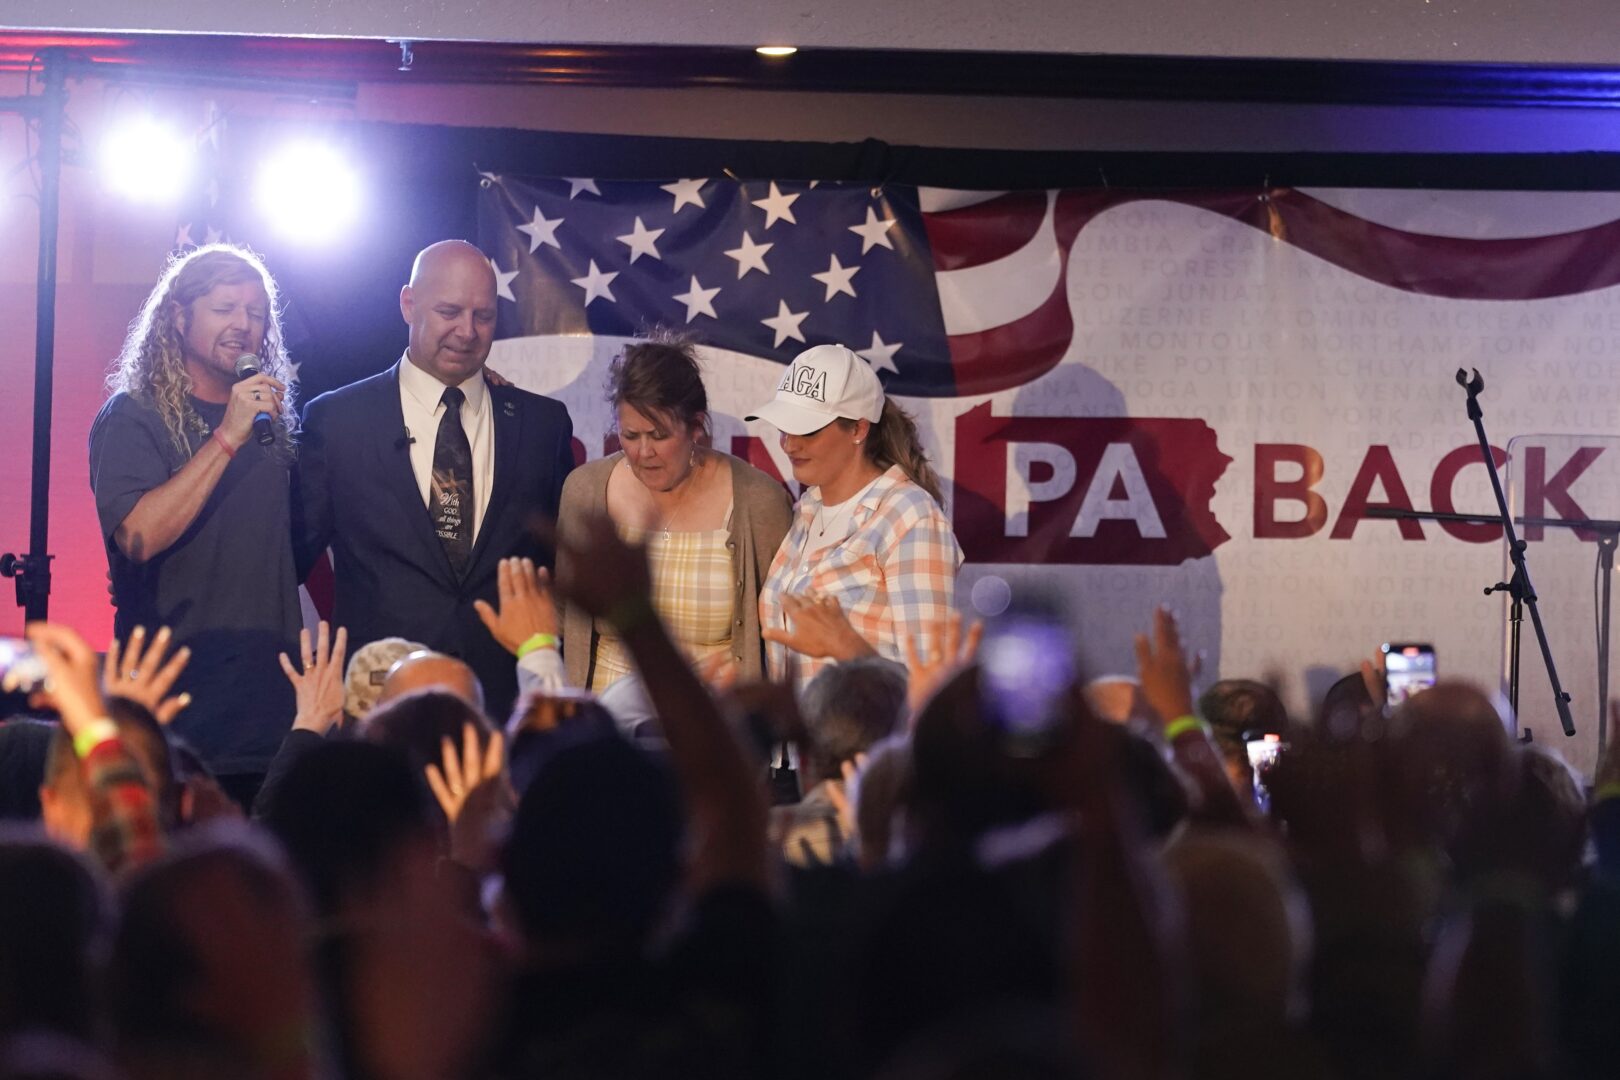 State Sen. Doug Mastriano, R-Franklin, a Republican candidate for Governor of Pennsylvania, stands on stage with Sean Feucht, left, his wife, Rebbeca, and Jenna Ellis, right, during a primary night election gathering in Chambersburg, Pa., Tuesday, May 17, 2022.